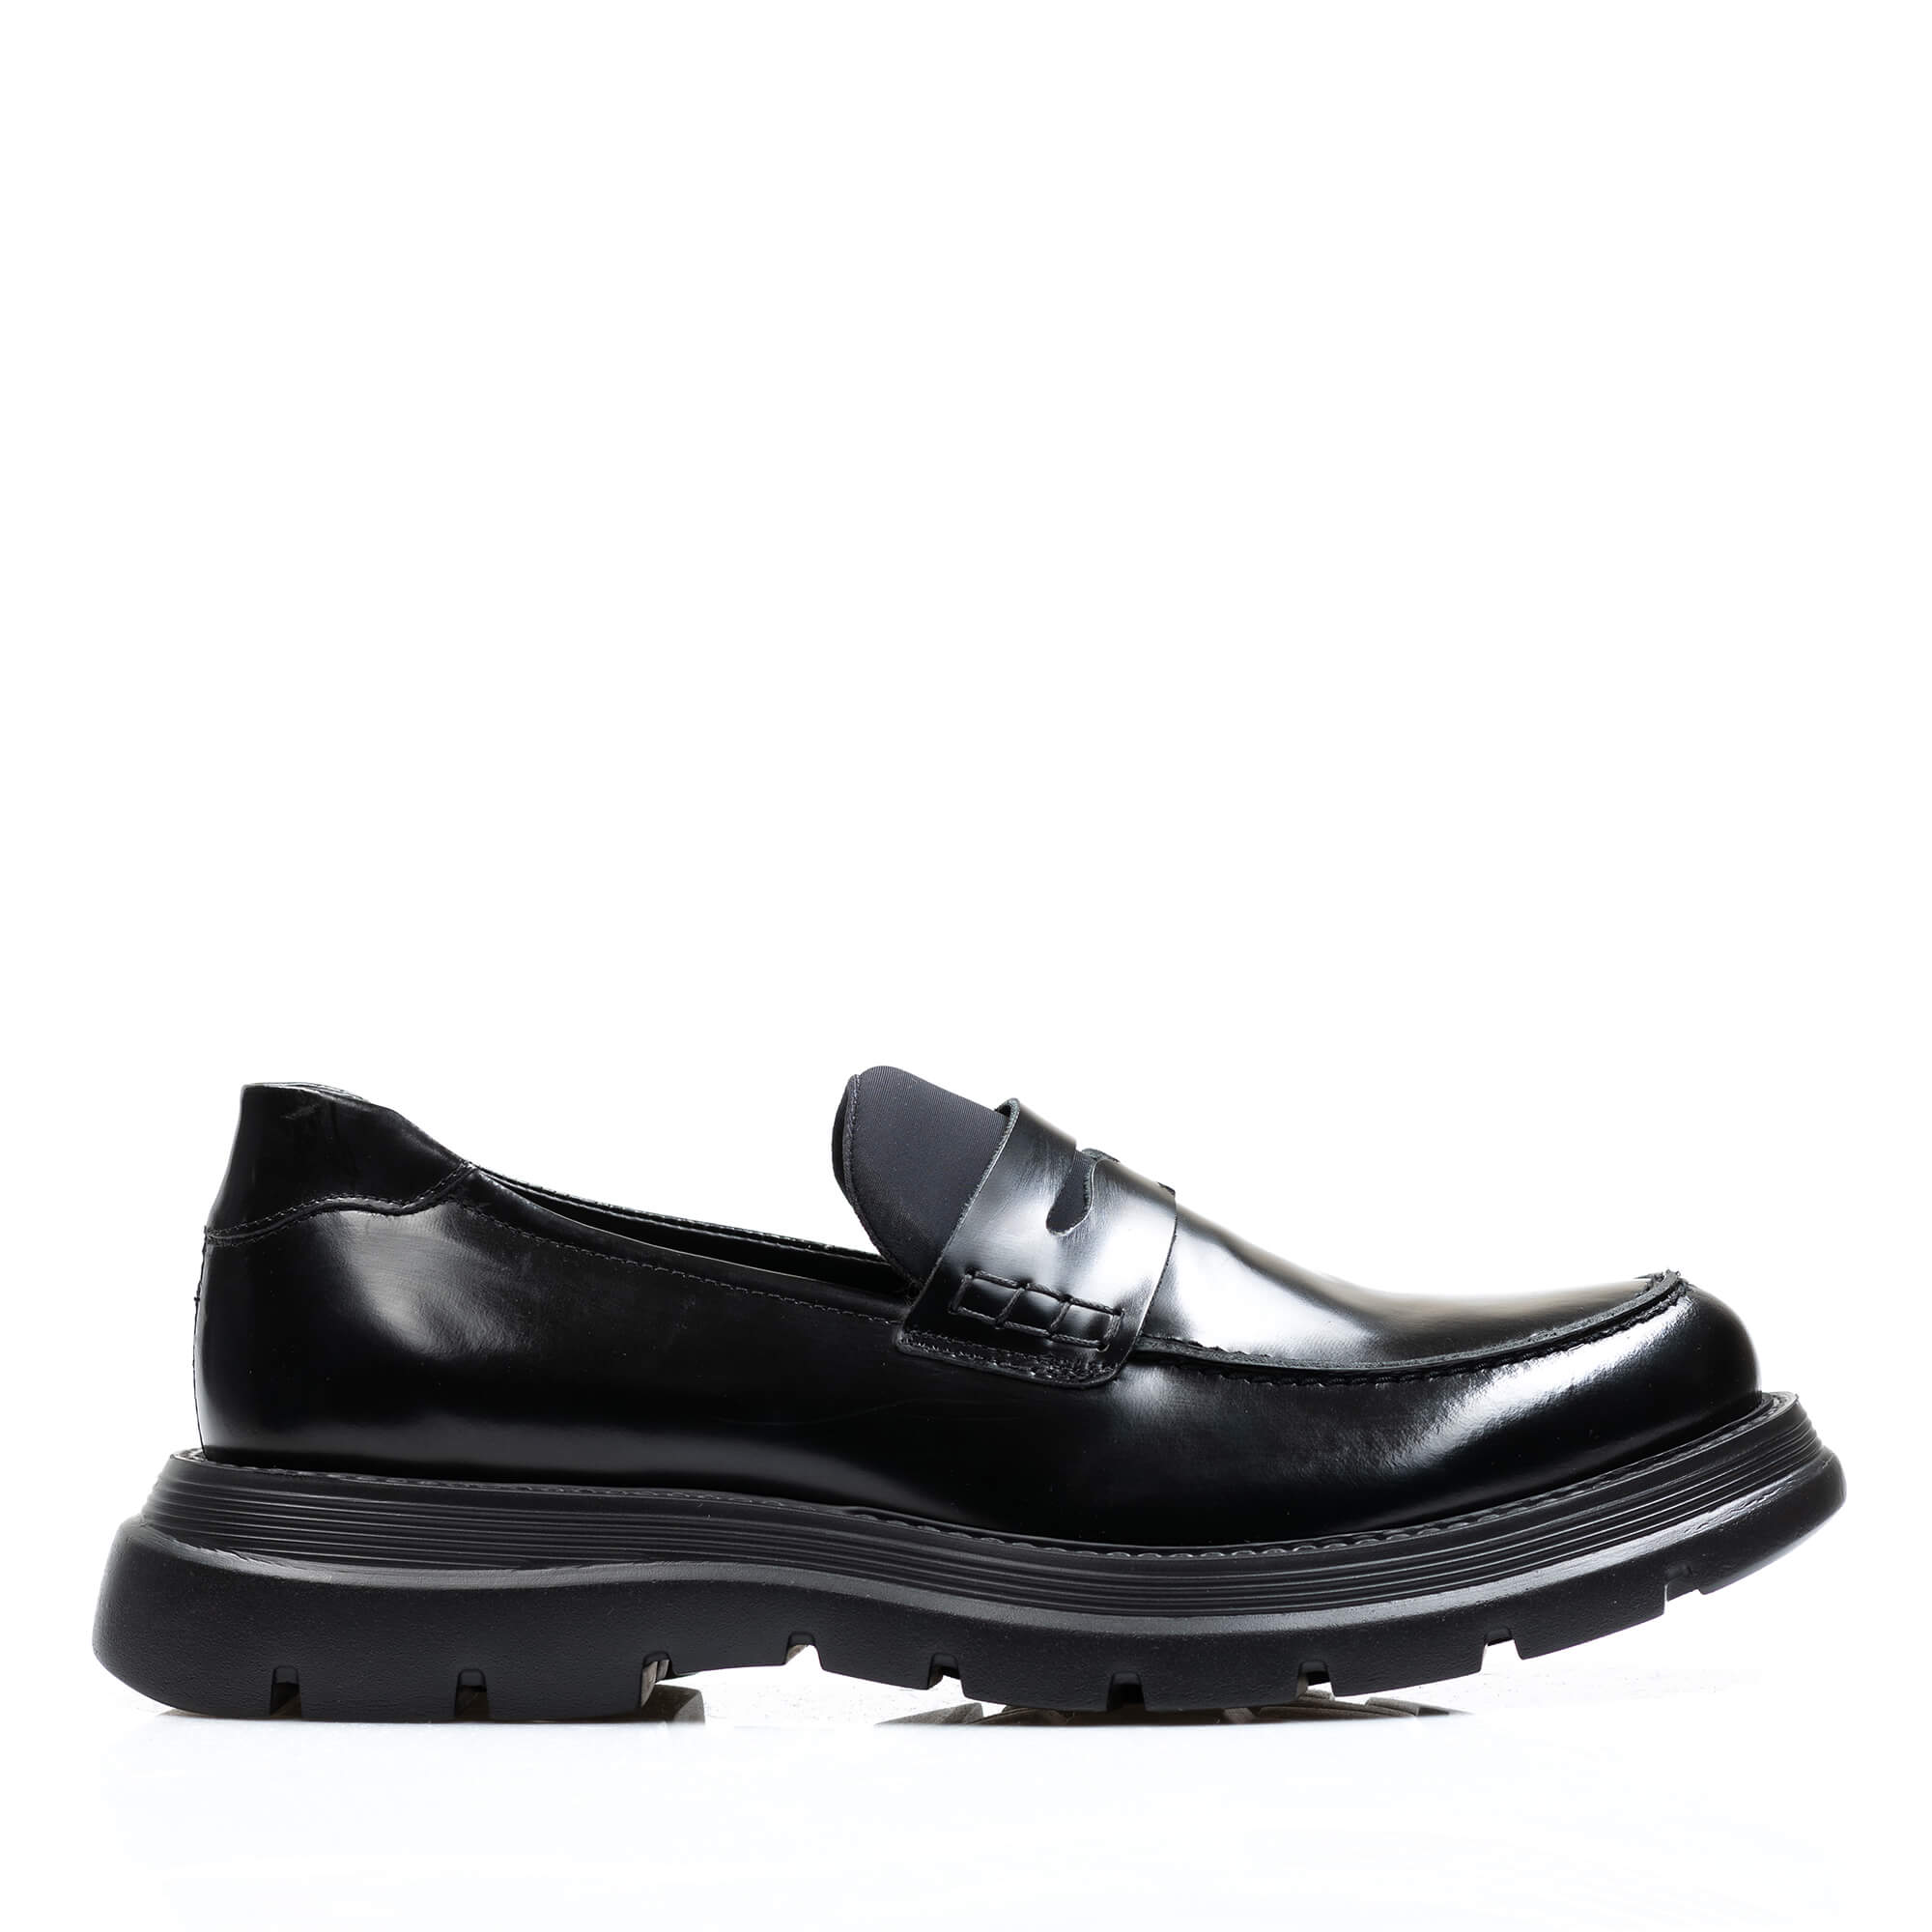 THICK SOLED LOAFER SHOES XLI